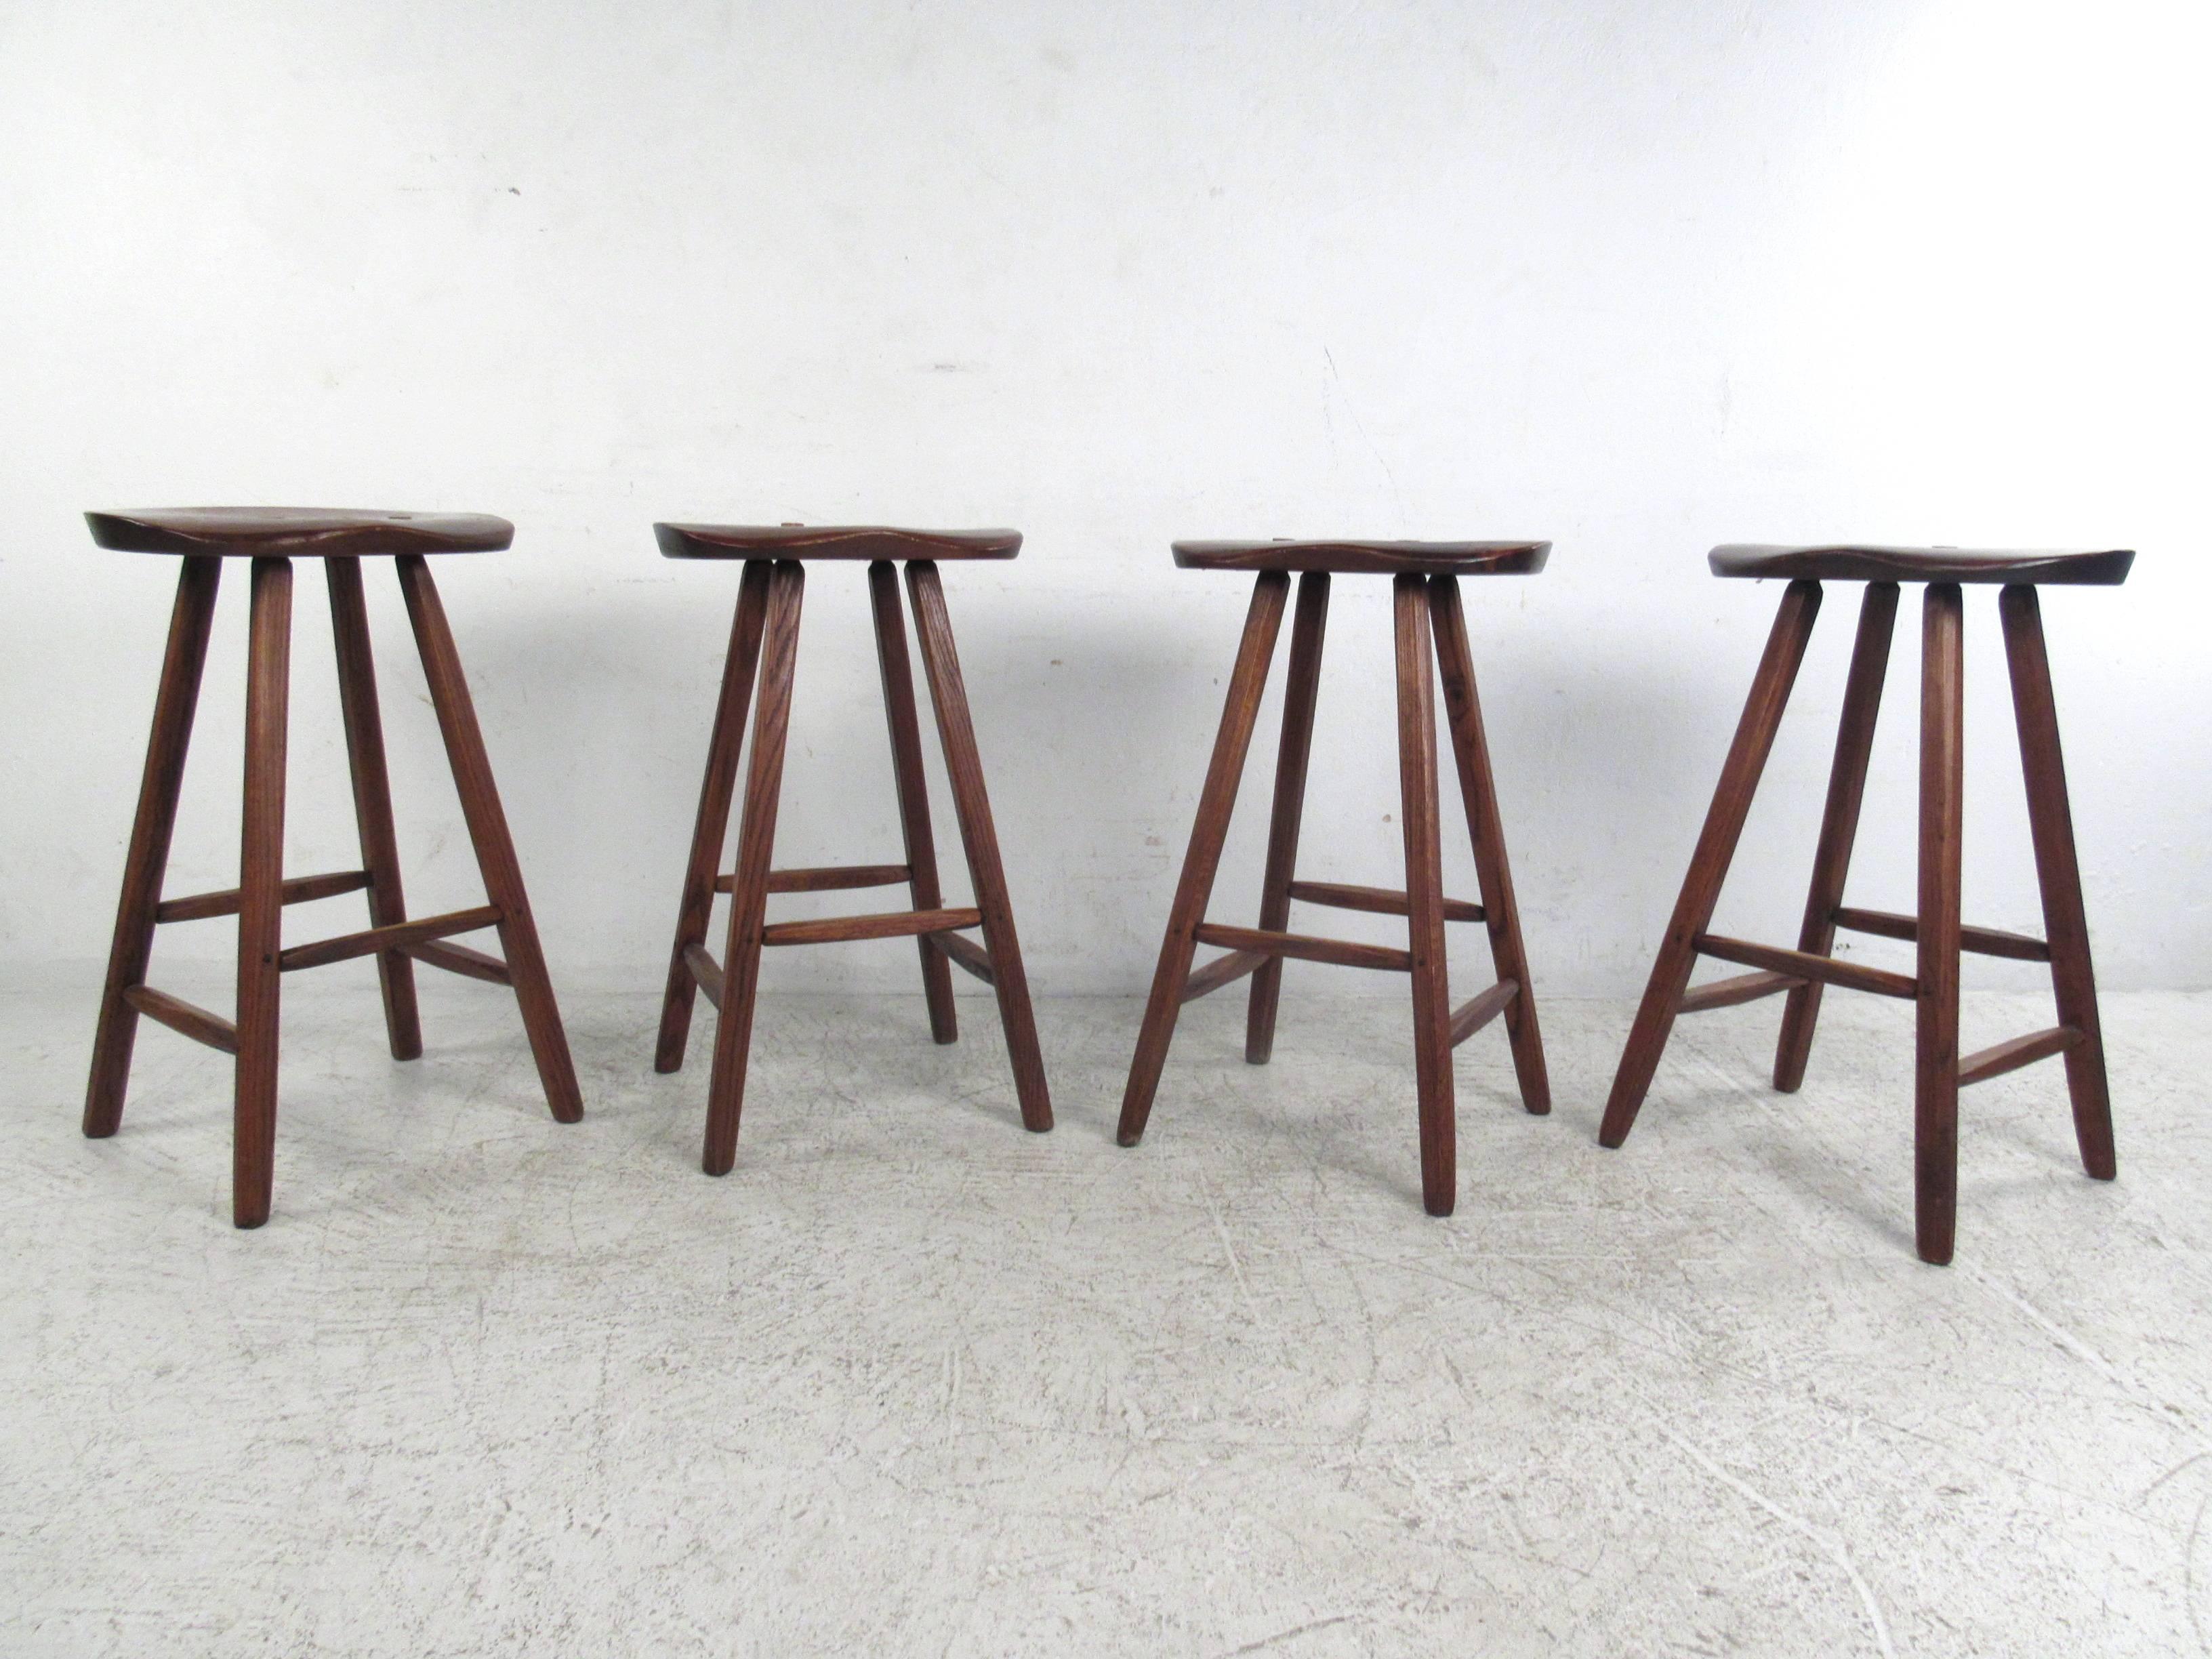 This set of four vintage stools measure just under 30 inches high, making them a unique option for counter or bar use. Primitive carved wood style is accented by dovetailed construction and tapered stretchers. The unique shape of the Primitive style